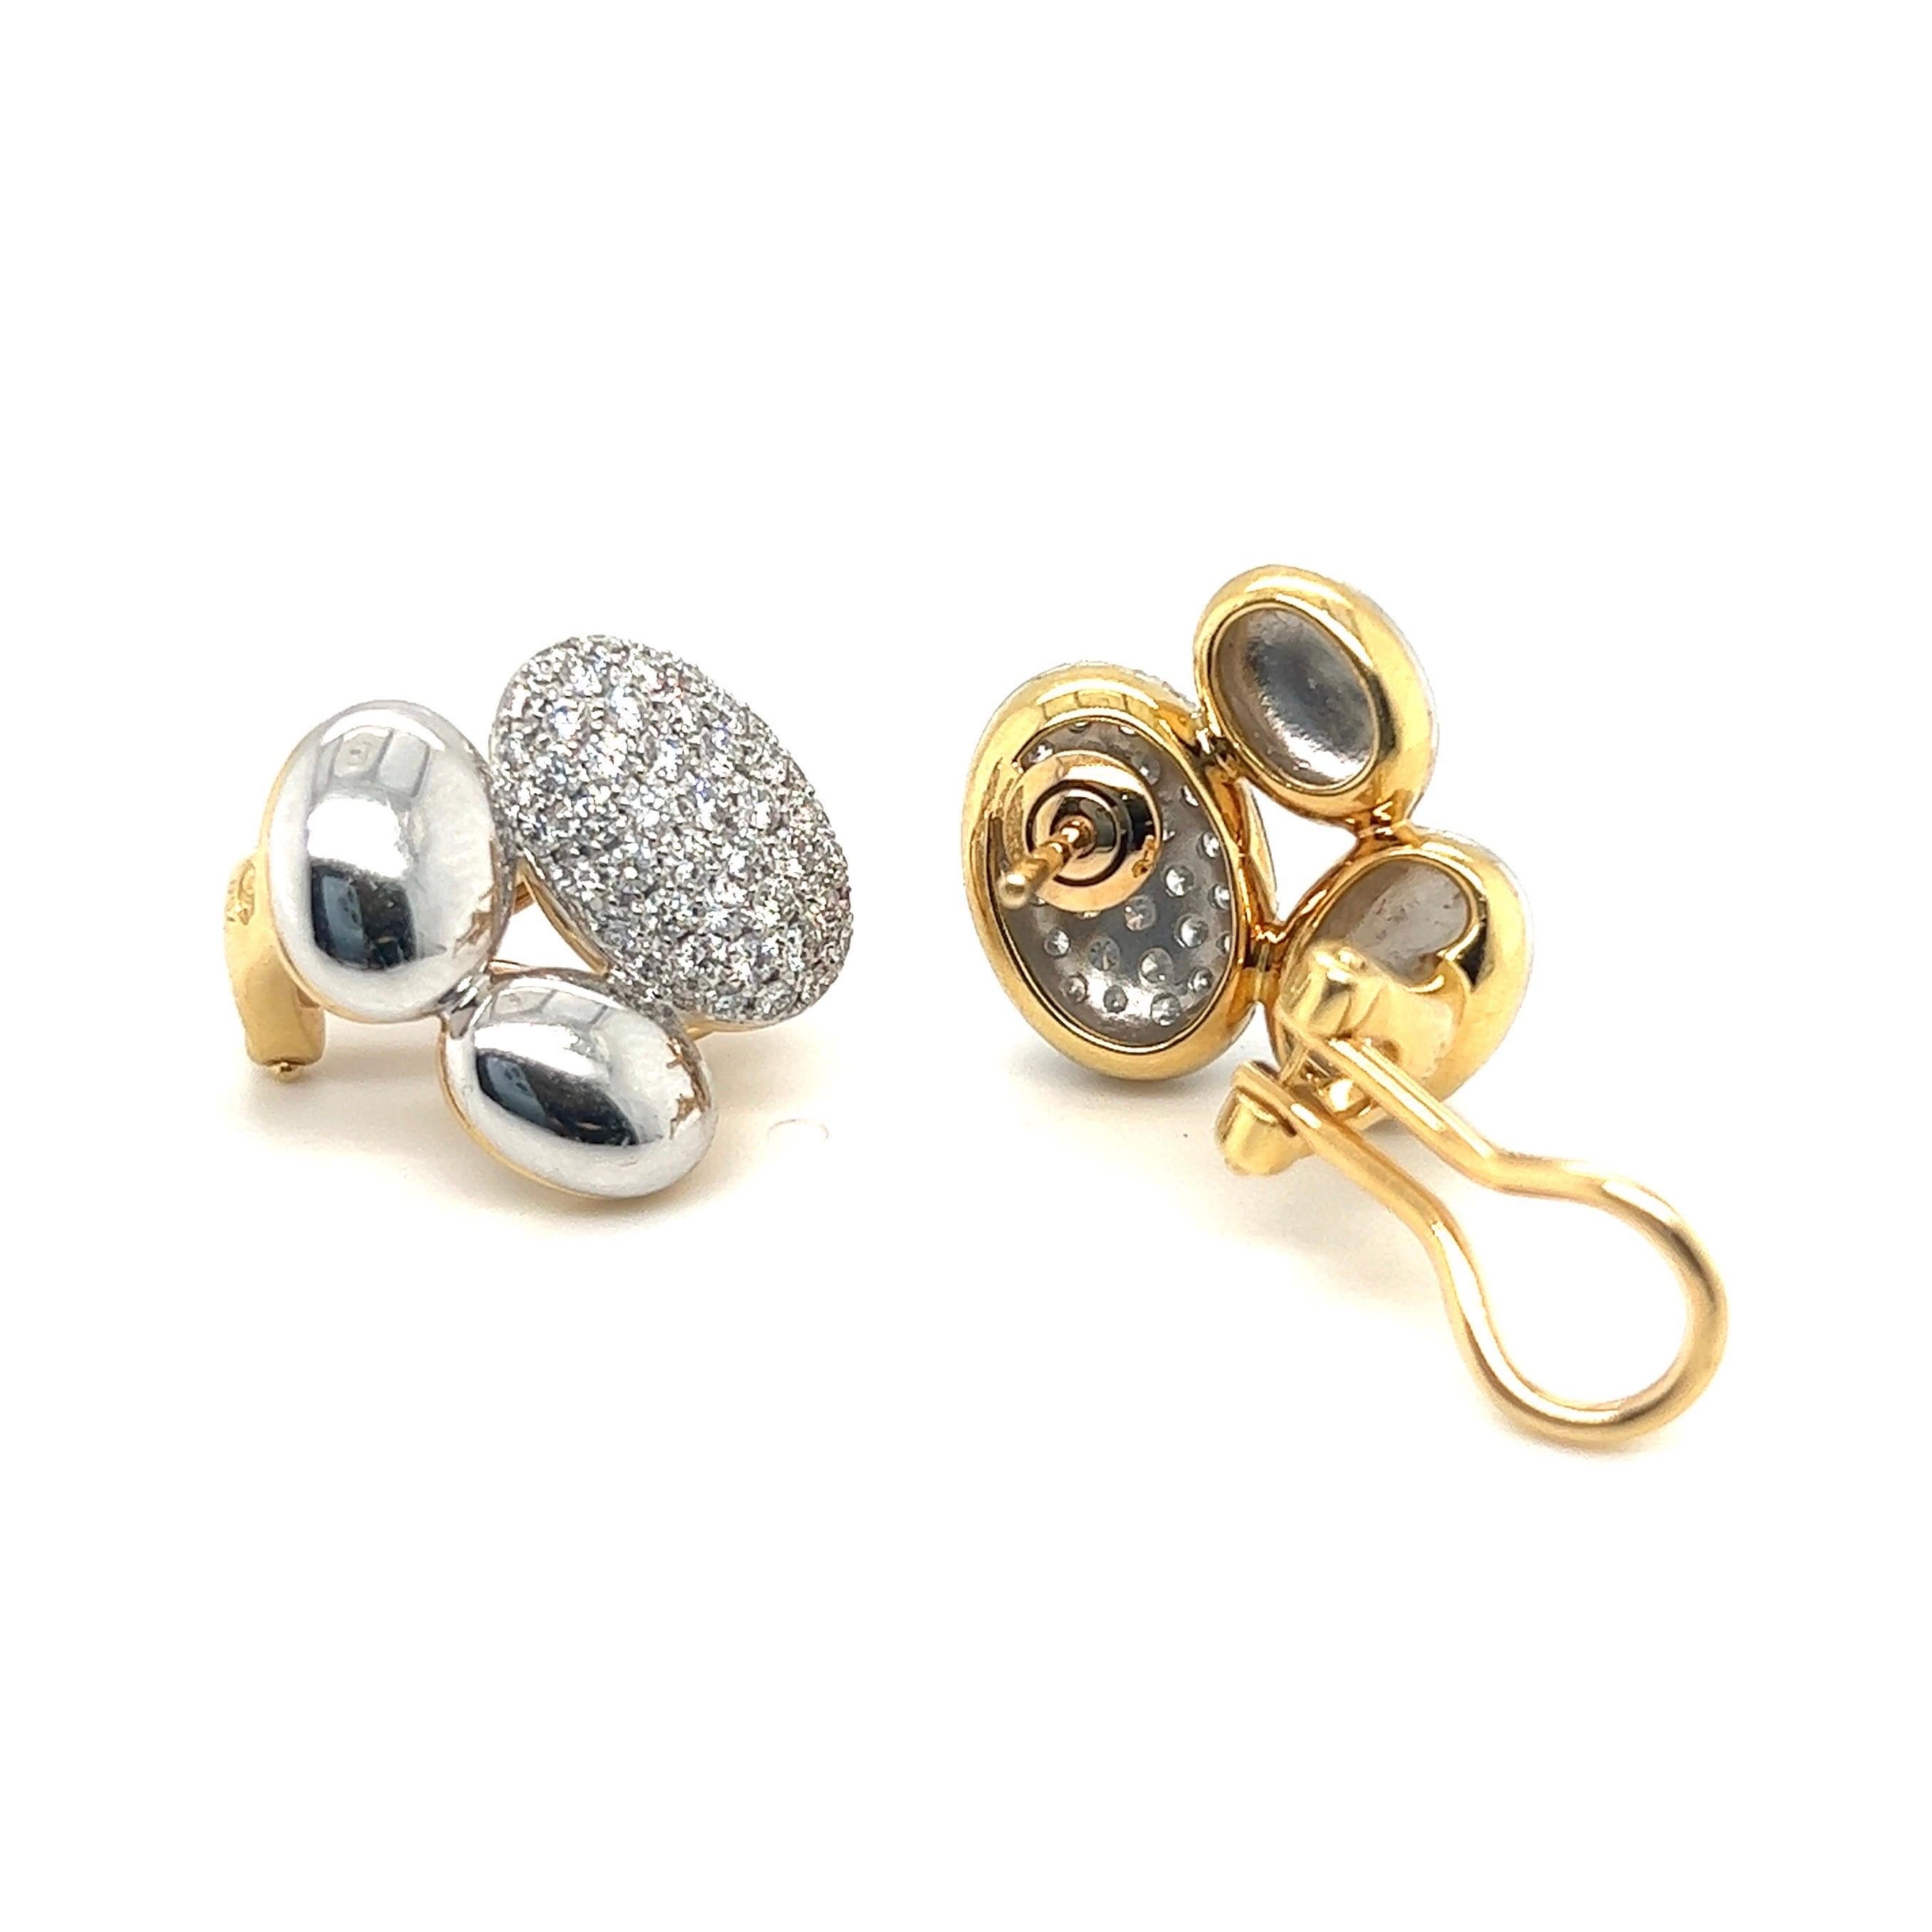 Contemporary 18 Karat White and Yellow Gold Diamond Earrings by Gubelin